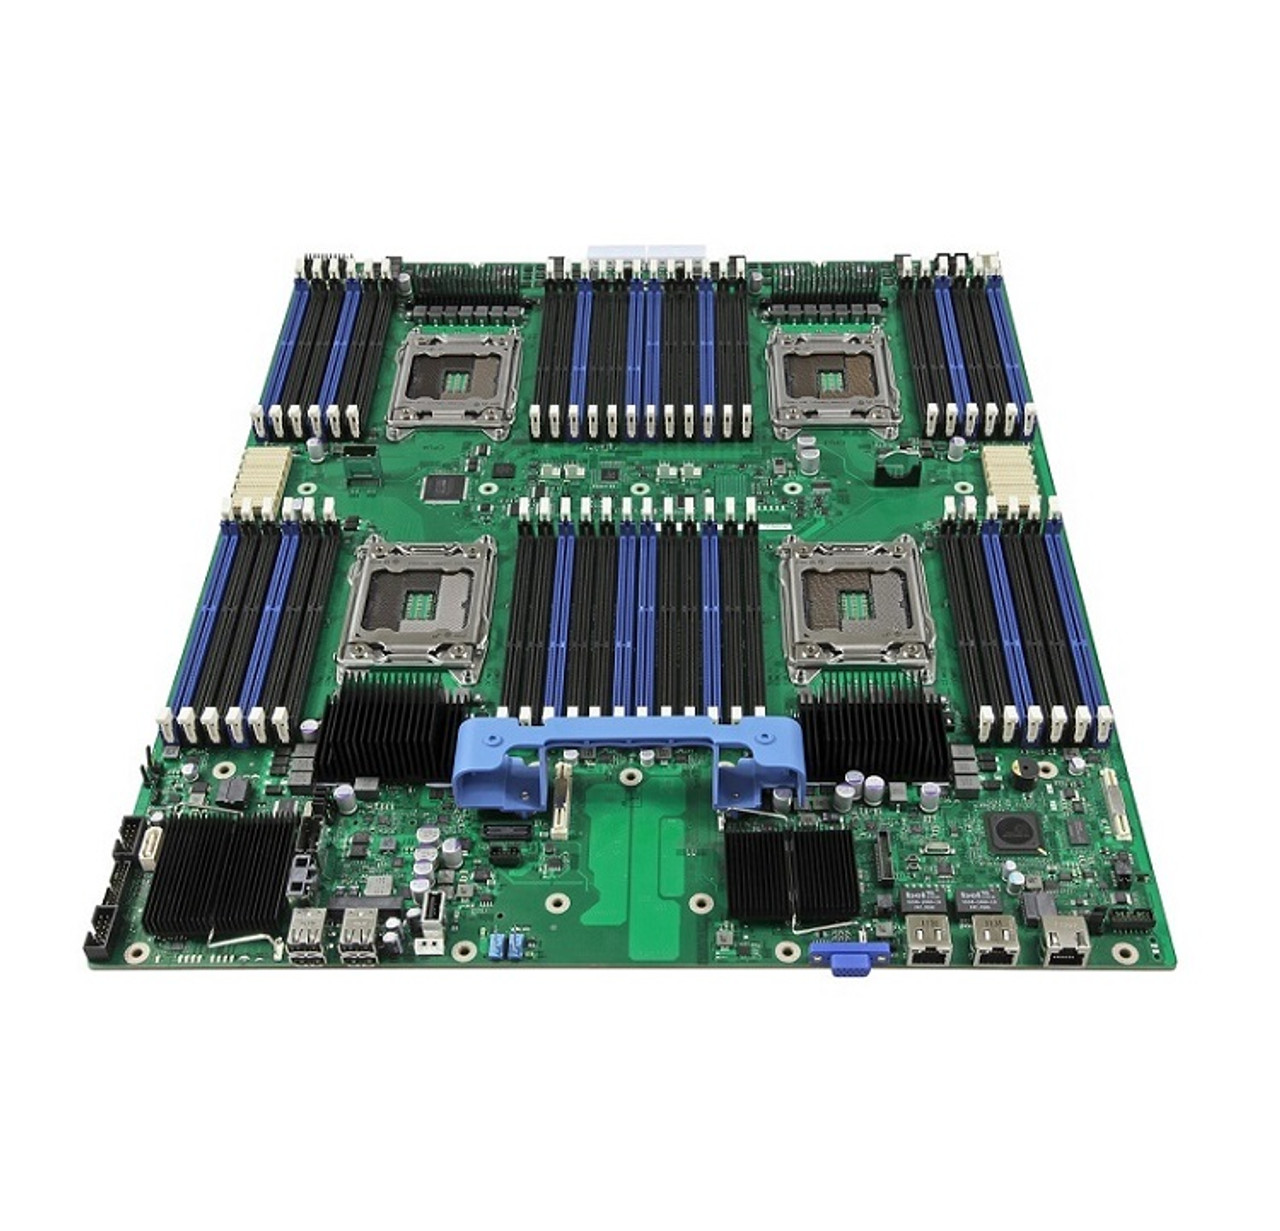 03F5DK - Dell System Board (Motherboard) for PowerEdge R905 Server